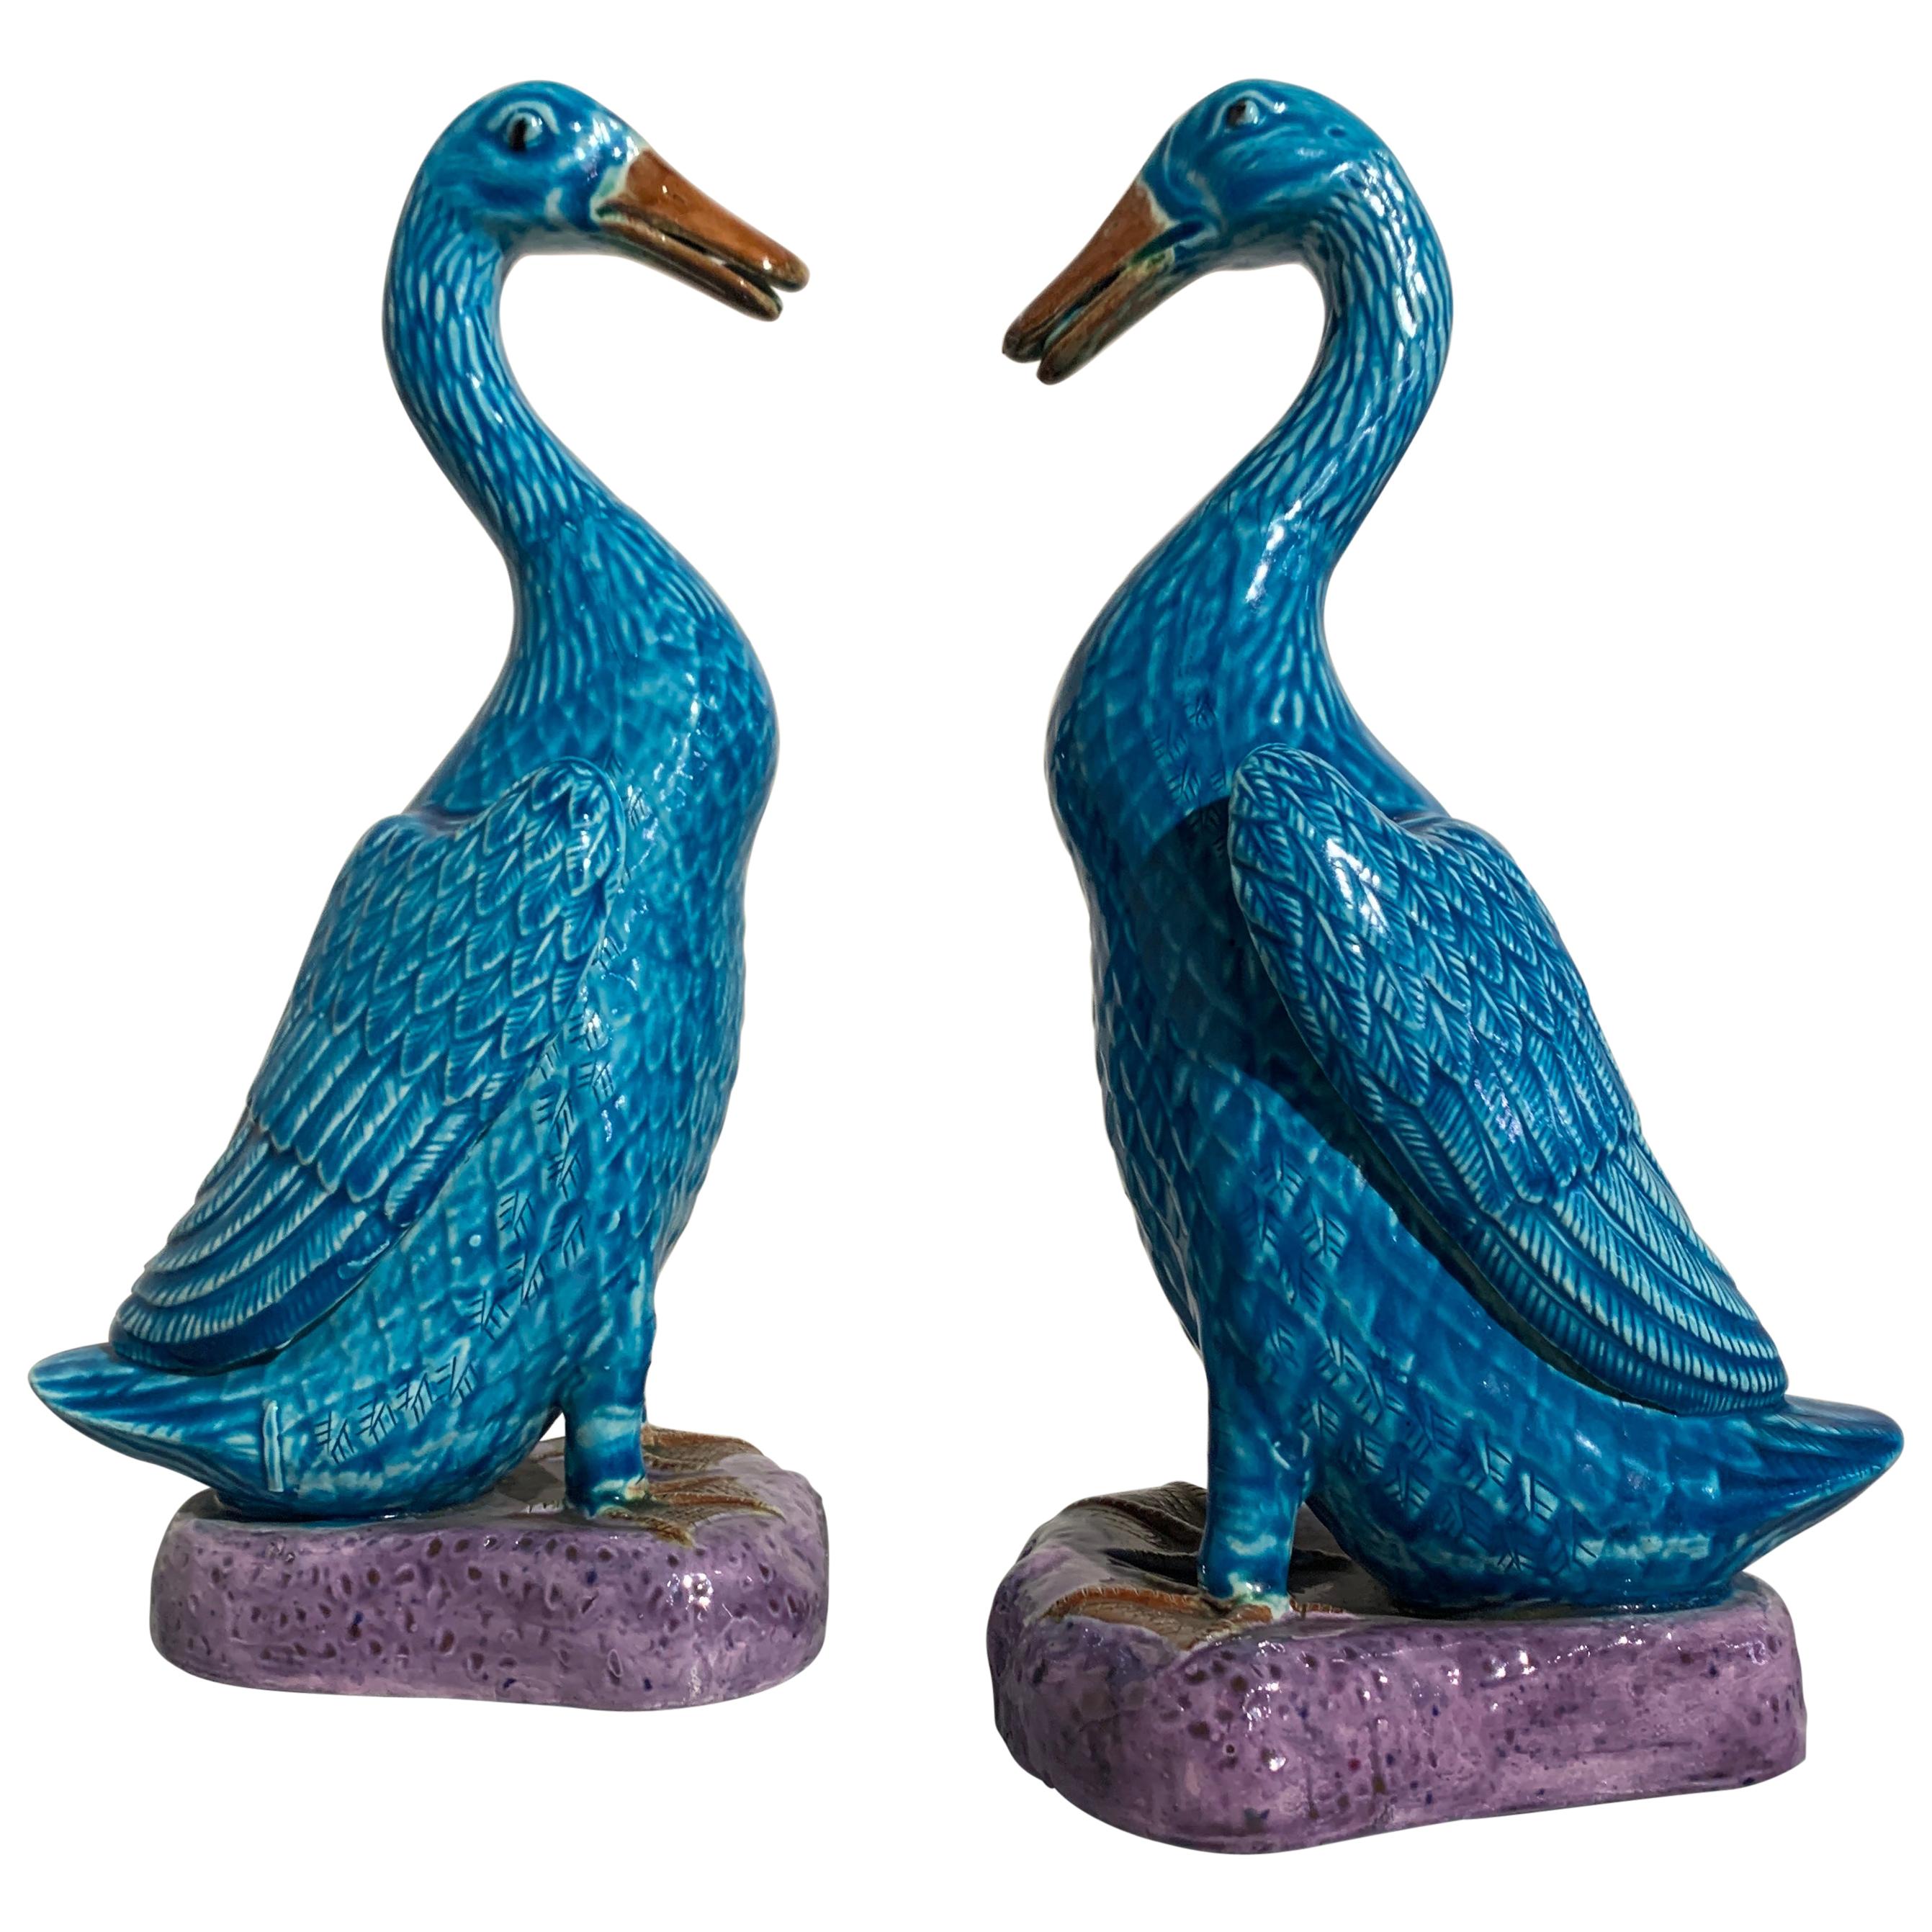 Pair of Vintage Chinese Export Turquoise Glazed Ducks, 1970s